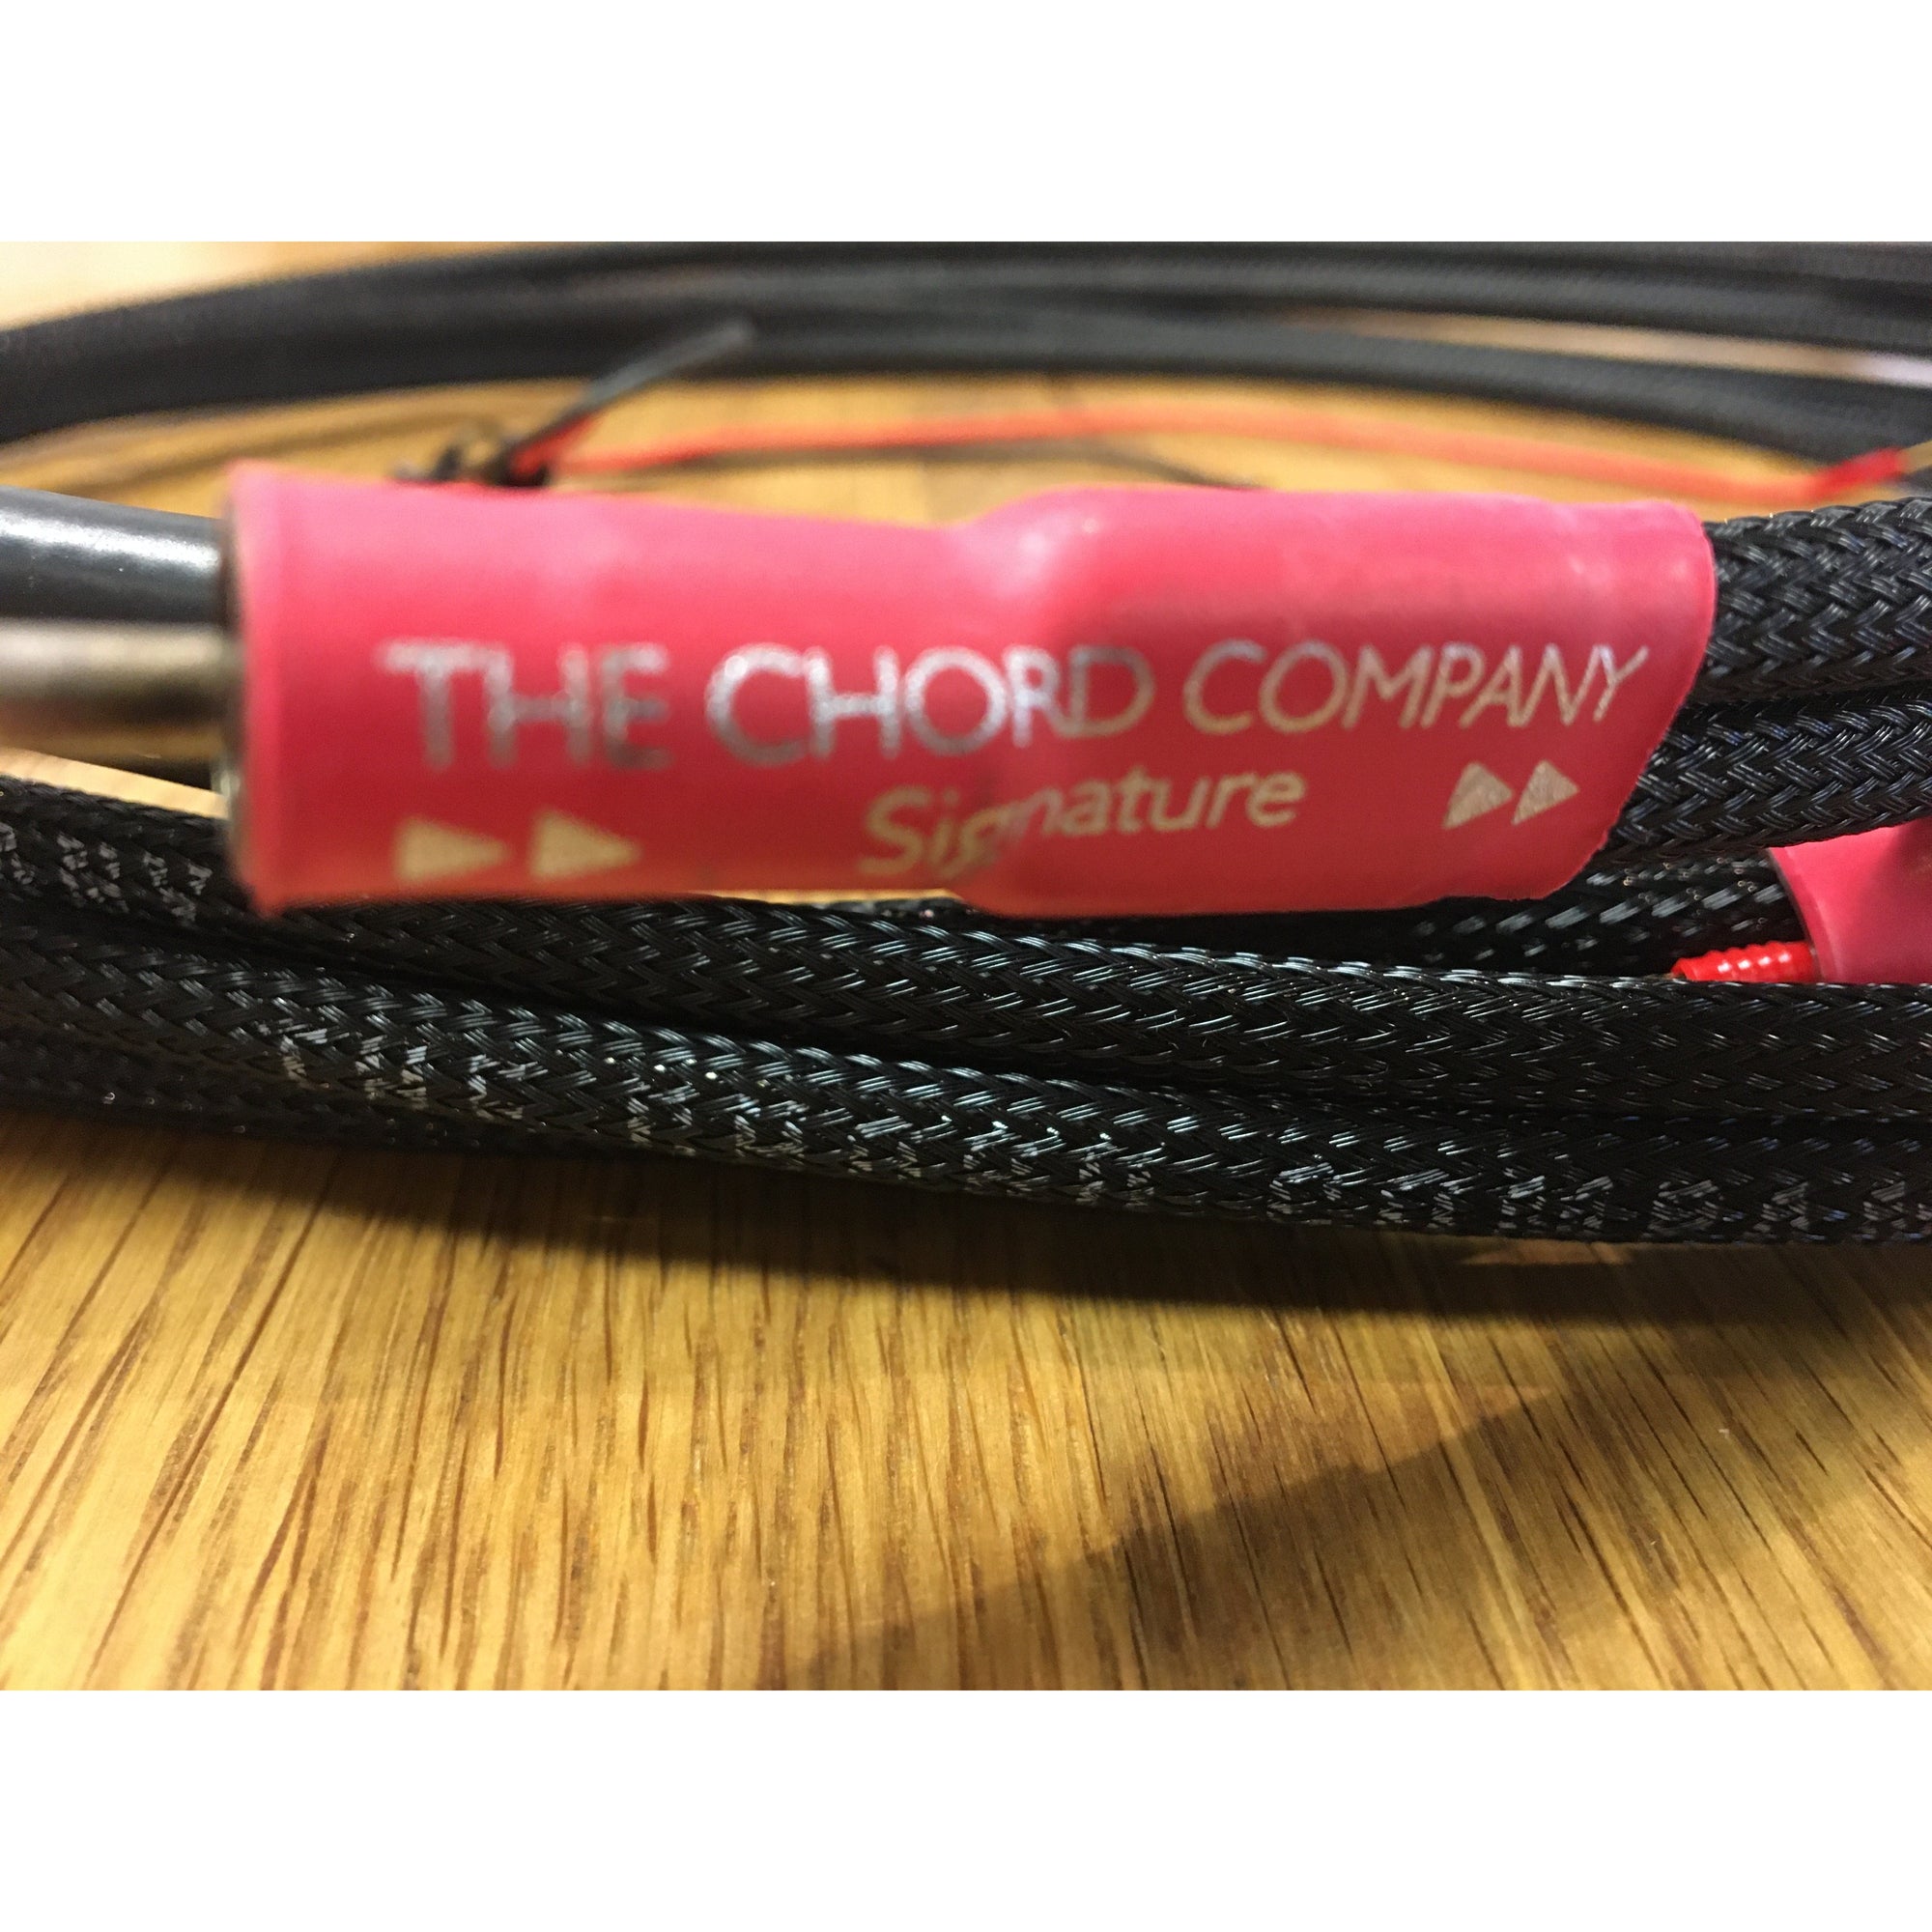 Chord Company - Signature - RCA Pair Analogue Interconnect - Previously Enjoyed - CHCH STORE